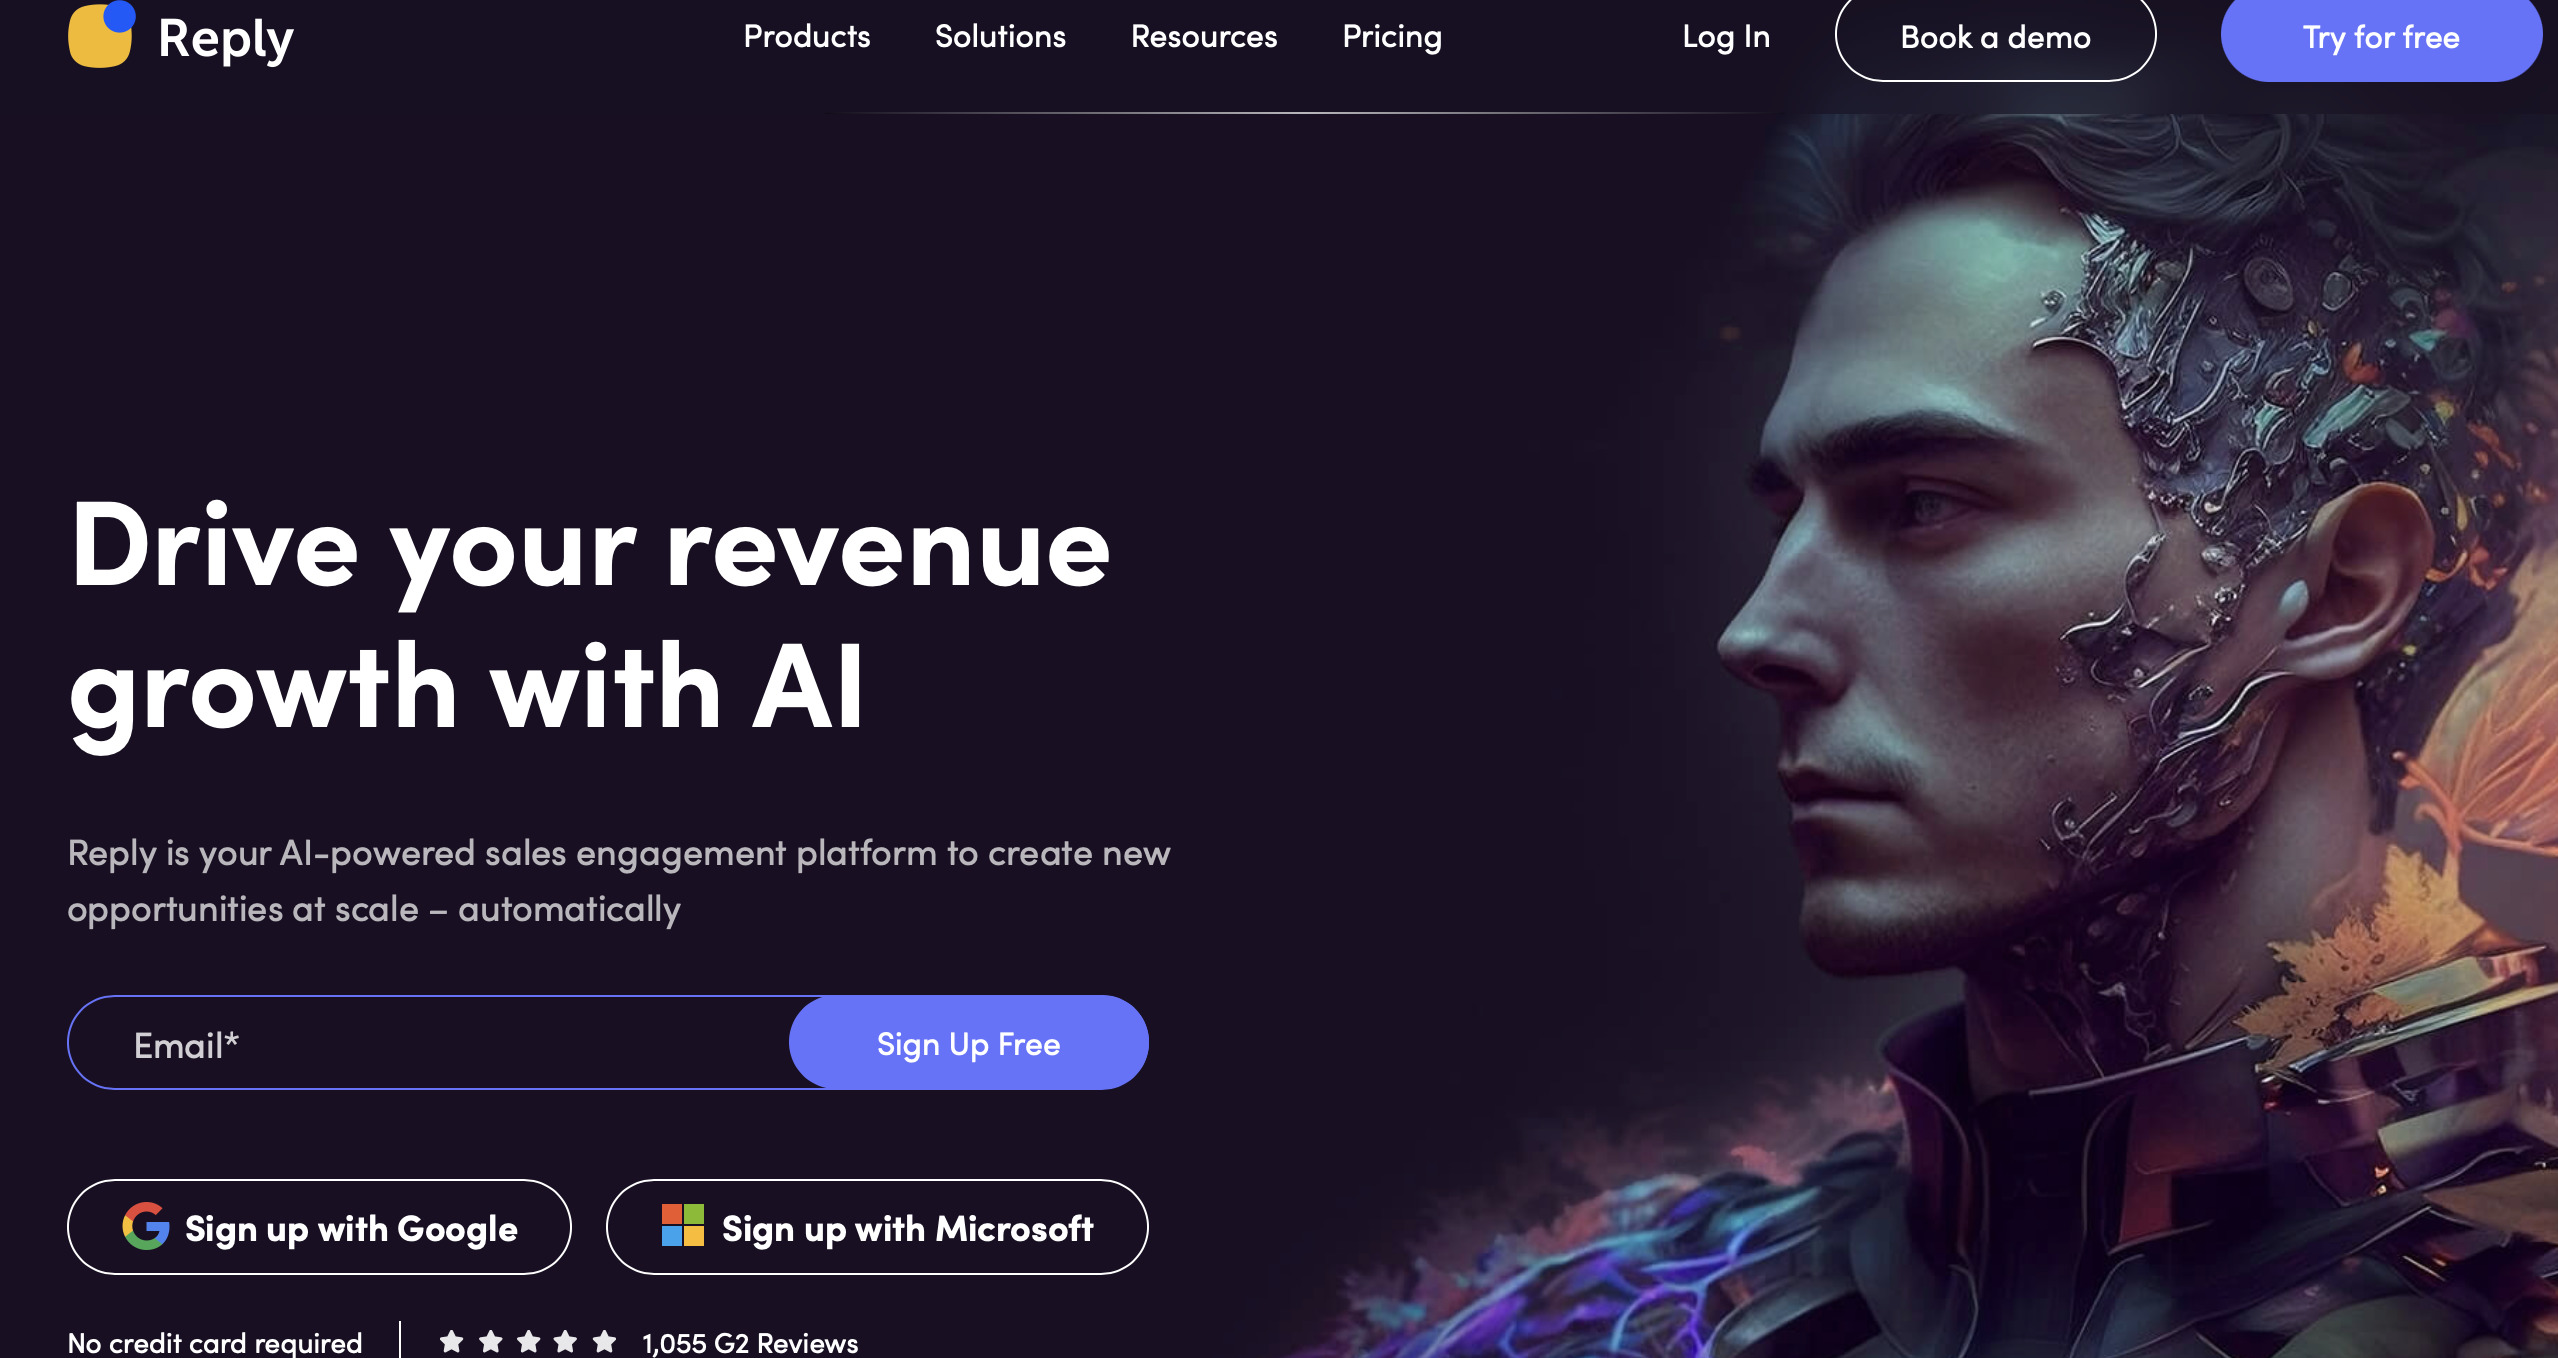 Reply.io AI tool for sales